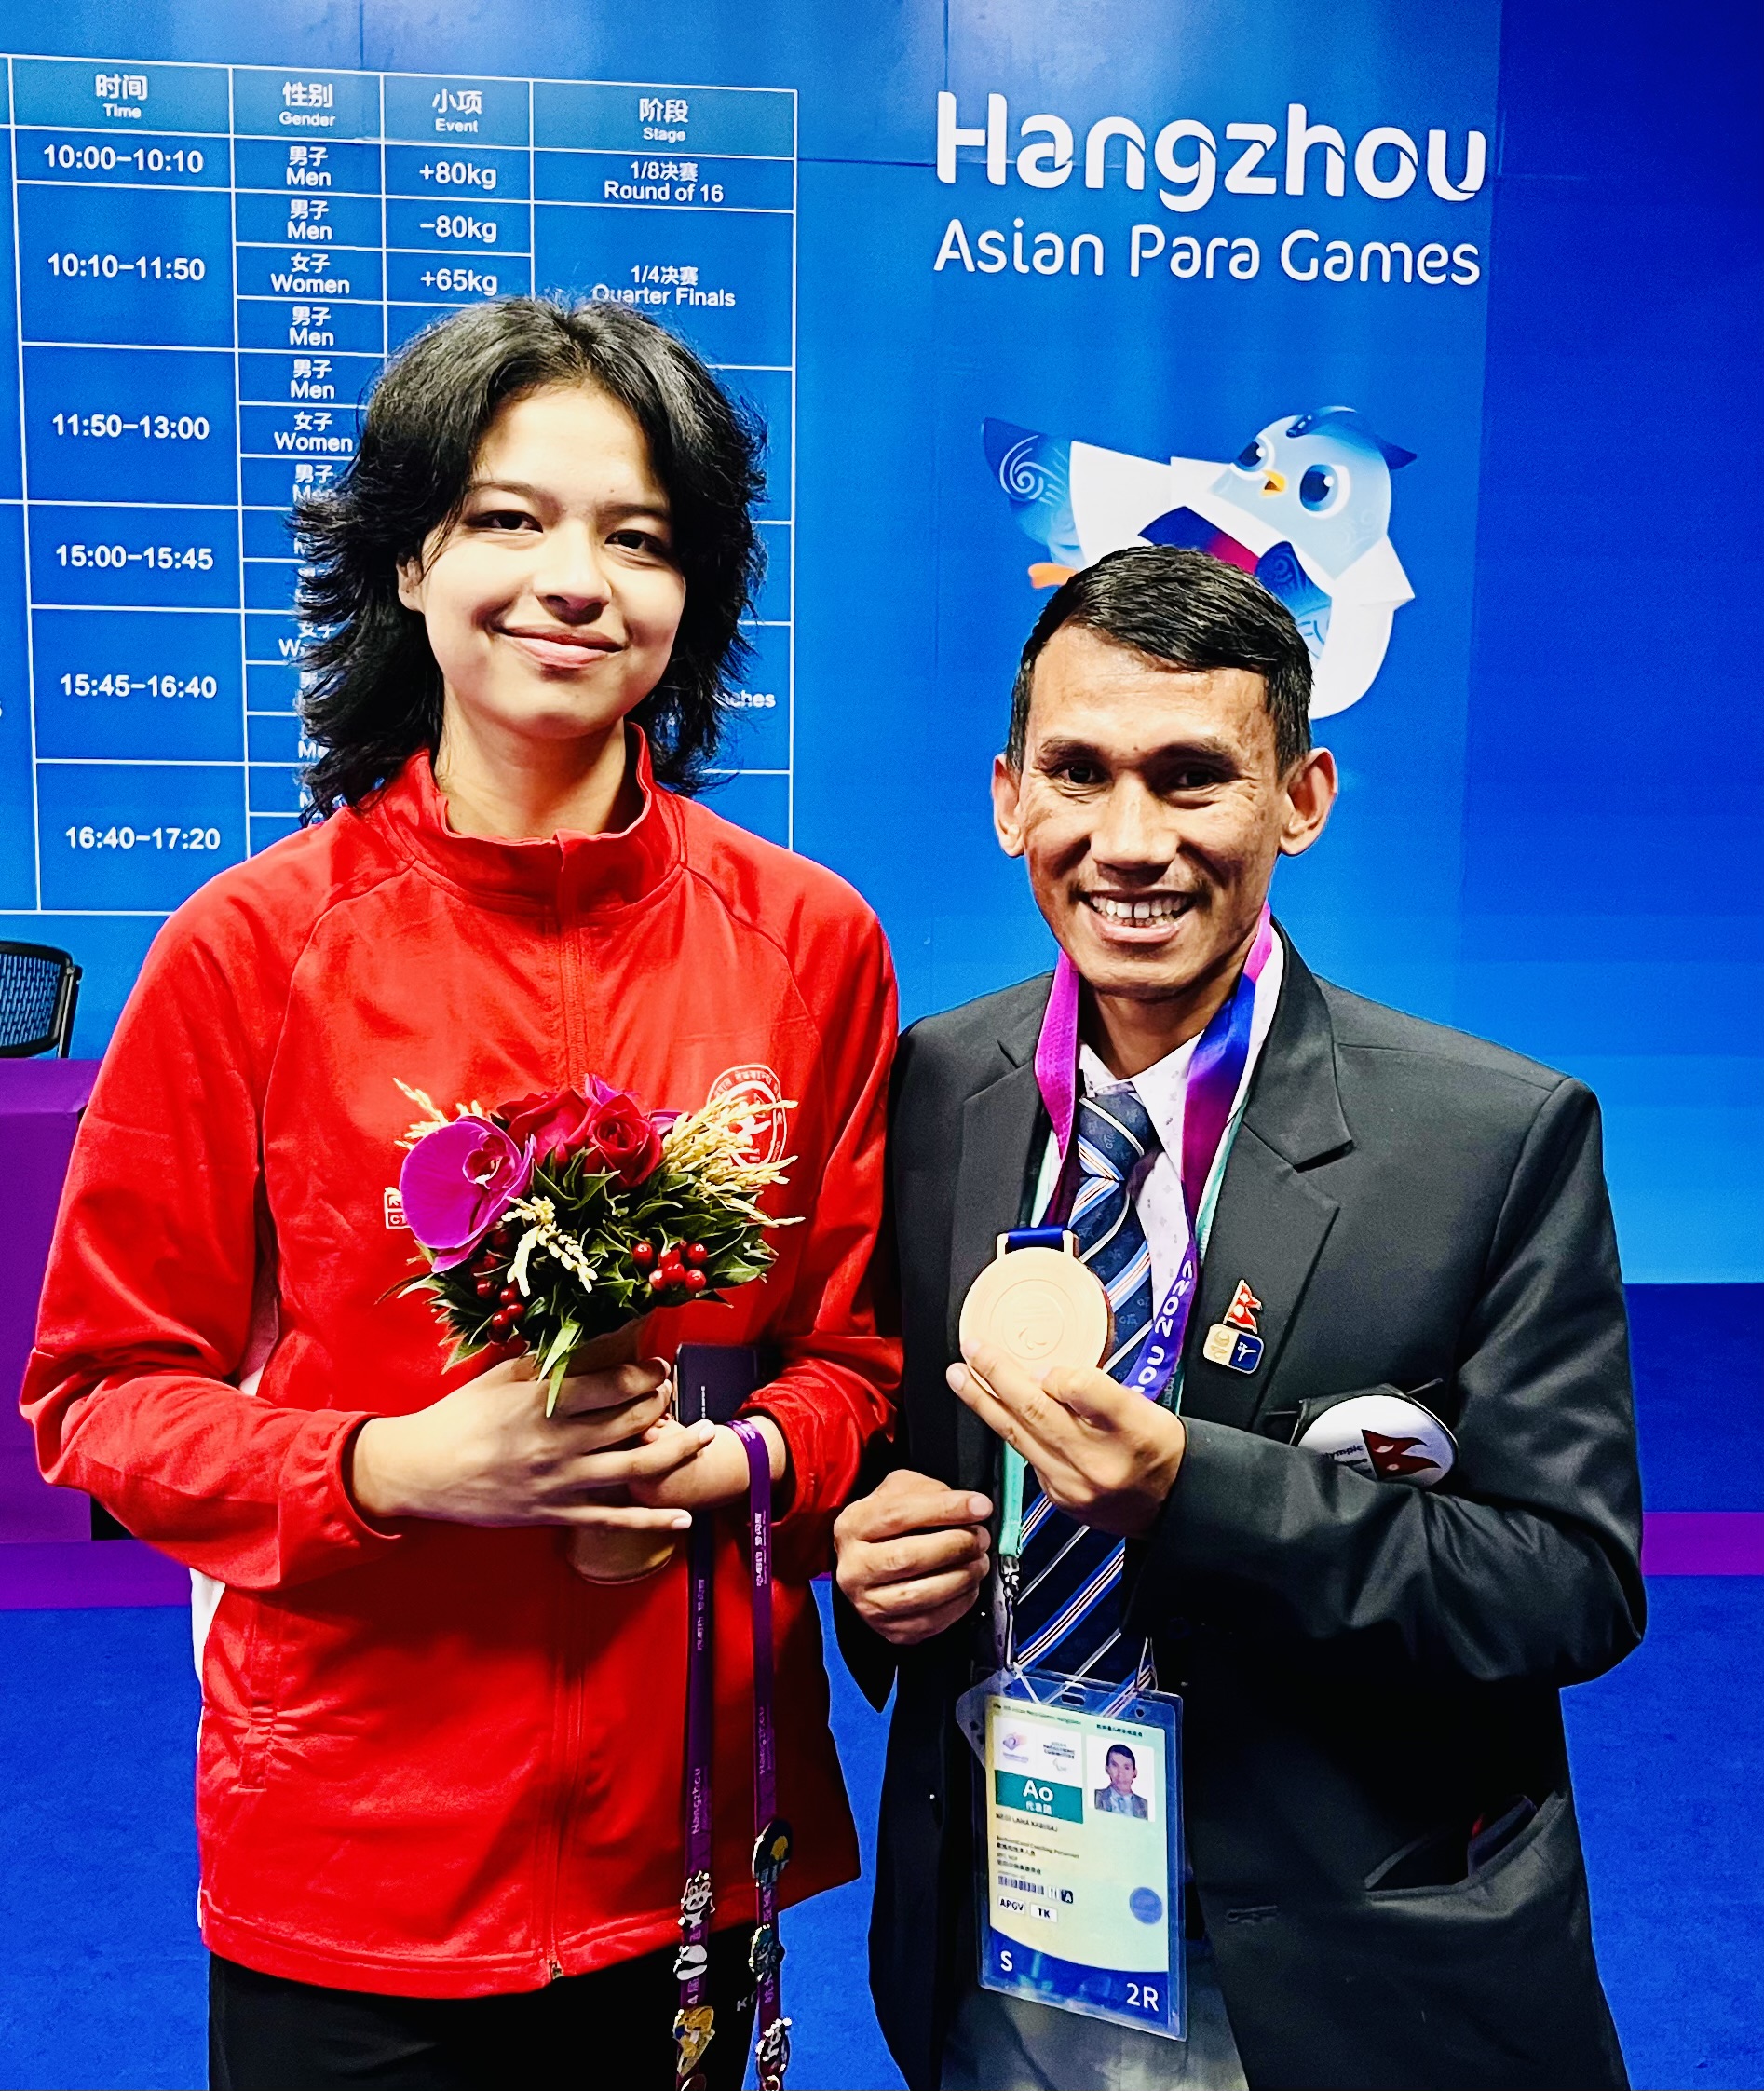 Palesha won the bronze medal in 4th Asian Para Games